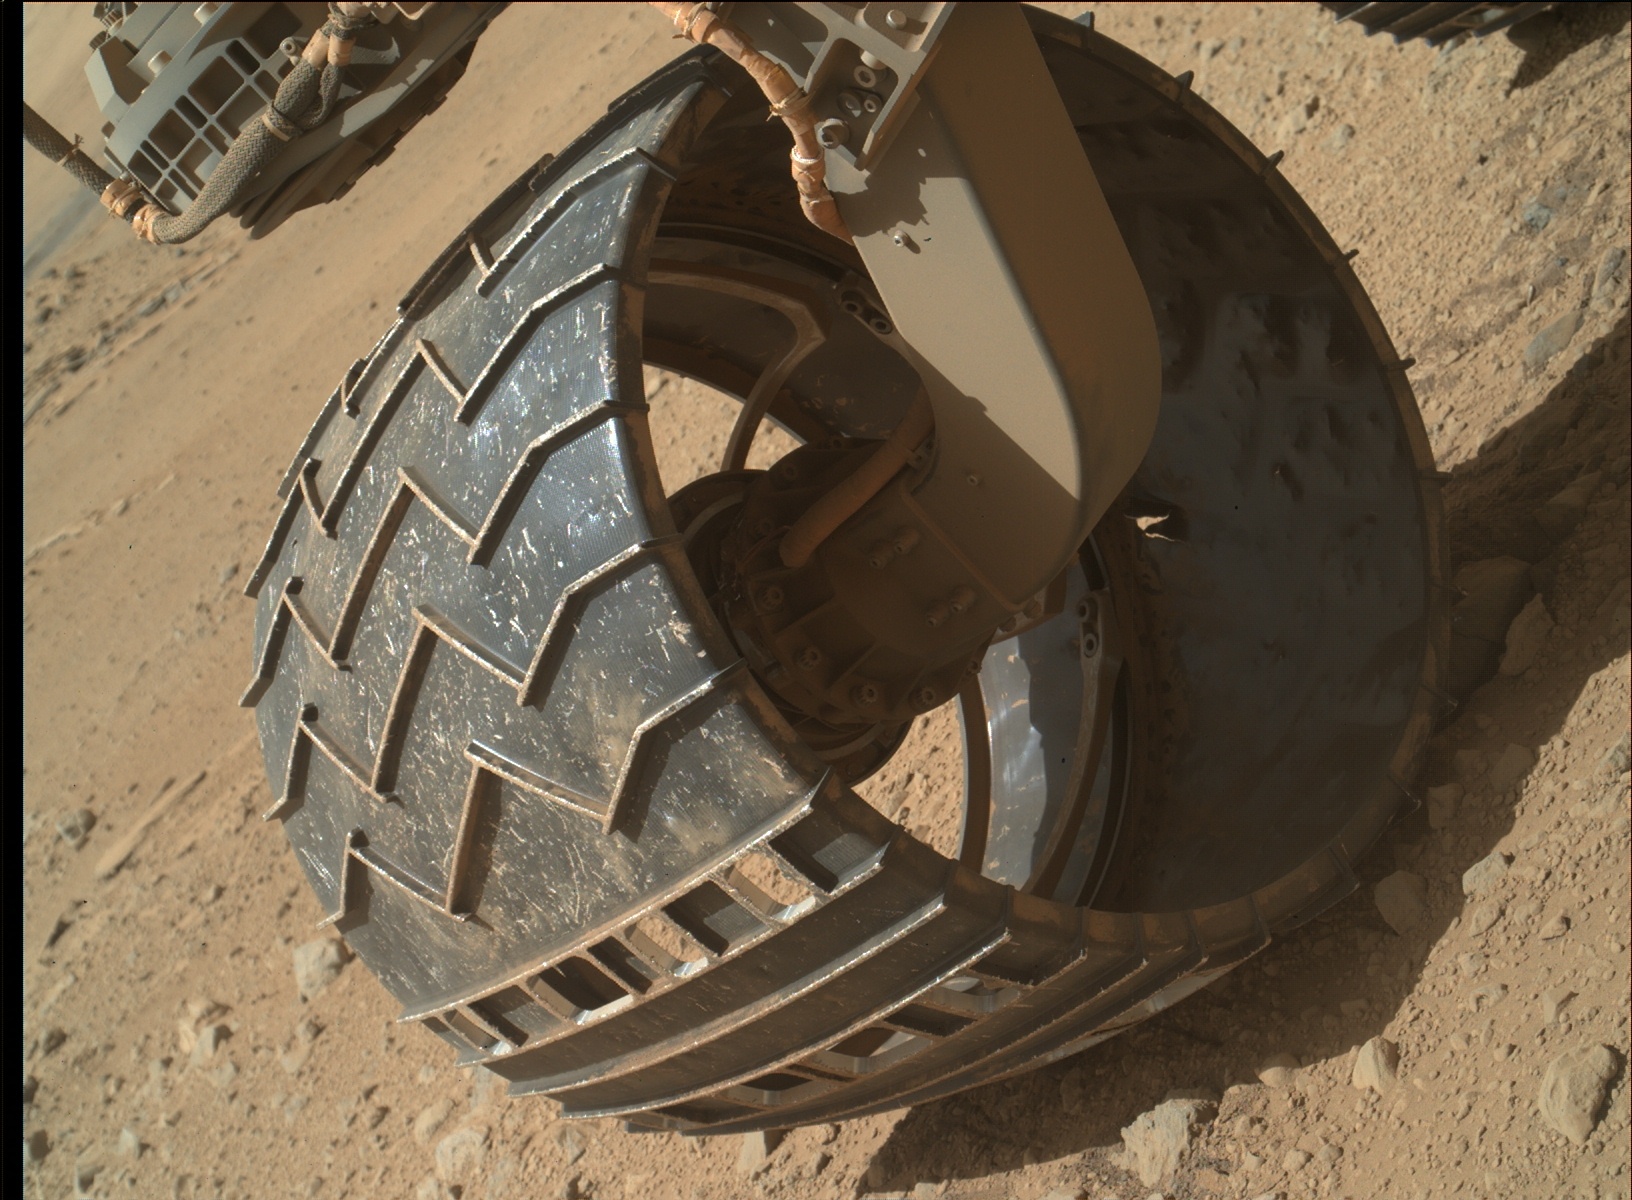 Nasa's Mars rover Curiosity acquired this image using its Mars Hand Lens Imager (MAHLI) on Sol 569